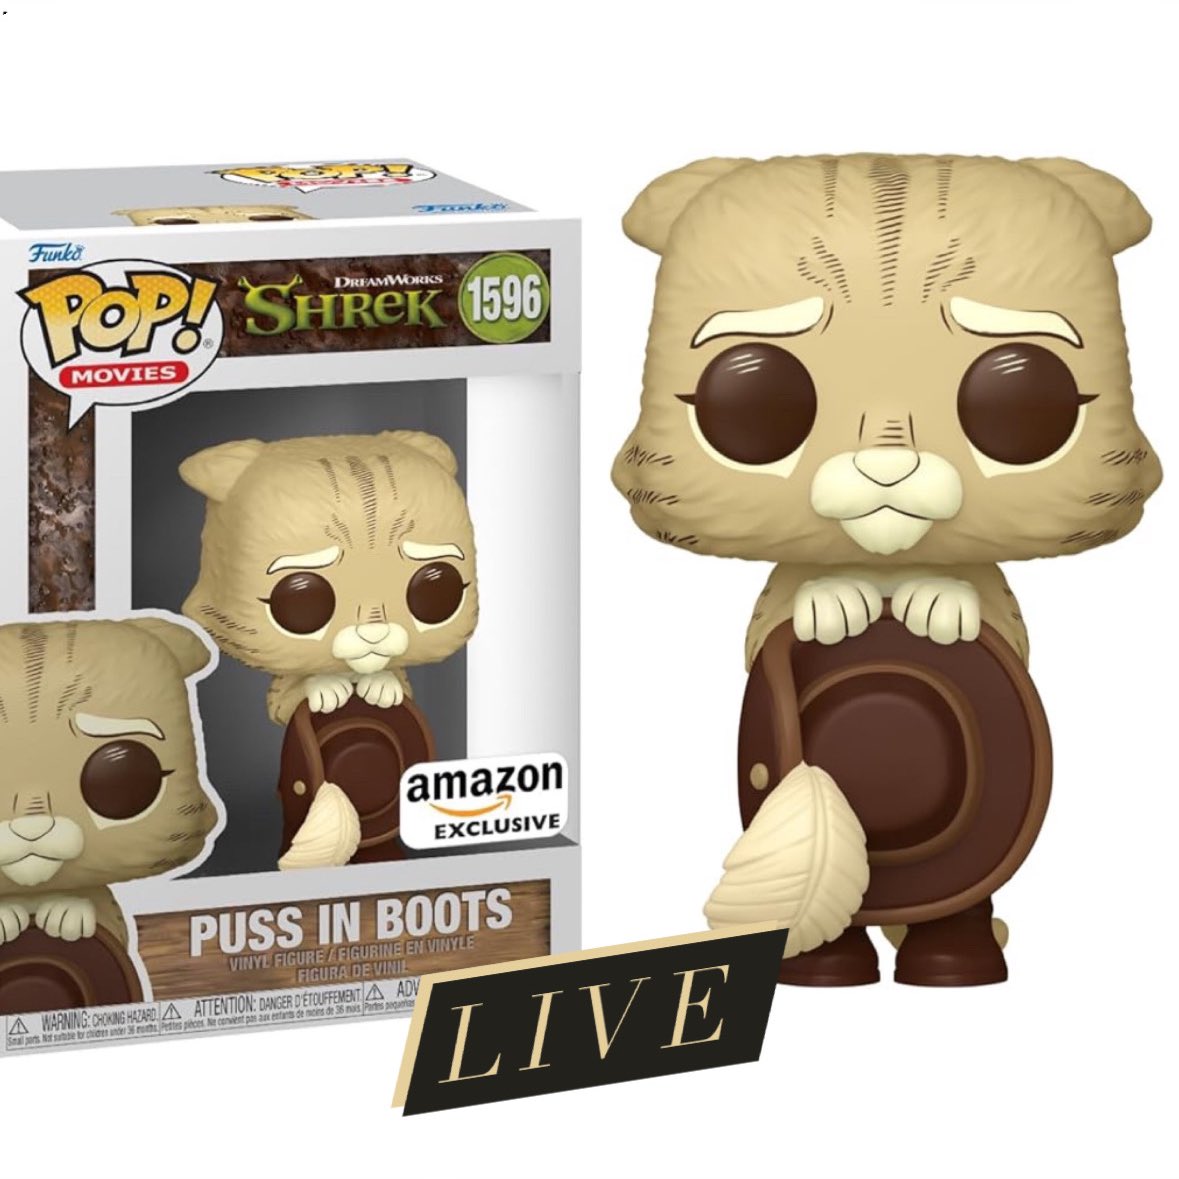 Now live! The Amazon exclusive Sepia Puss in Boots Funko POP!
Linky ~ fnkpp.com/AmPuss
#Ad #PussInBoots #FPN #FunkoPOPNews #Funko #POP #POPVinyl #FunkoPOP #FunkoSoda